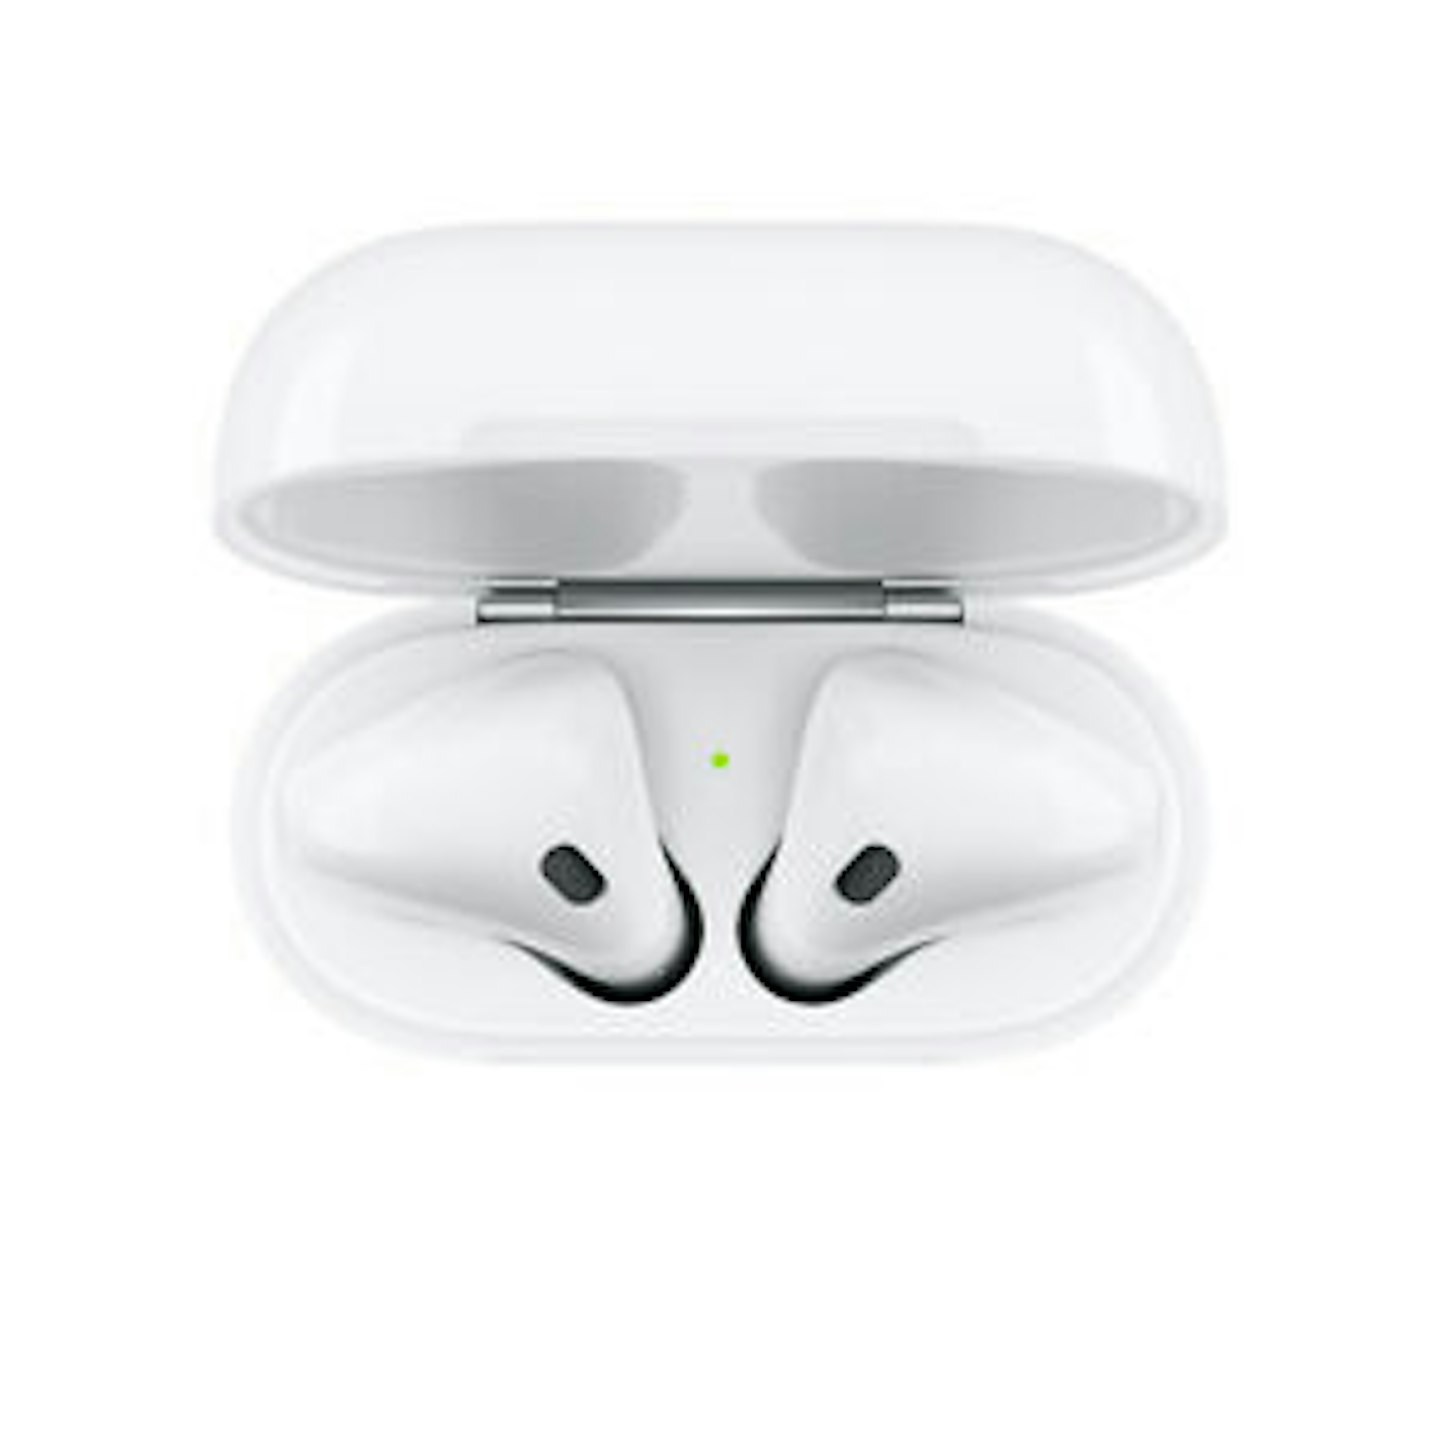 Apple AirPods 2nd Generation Bluetooth Headphones with Charge